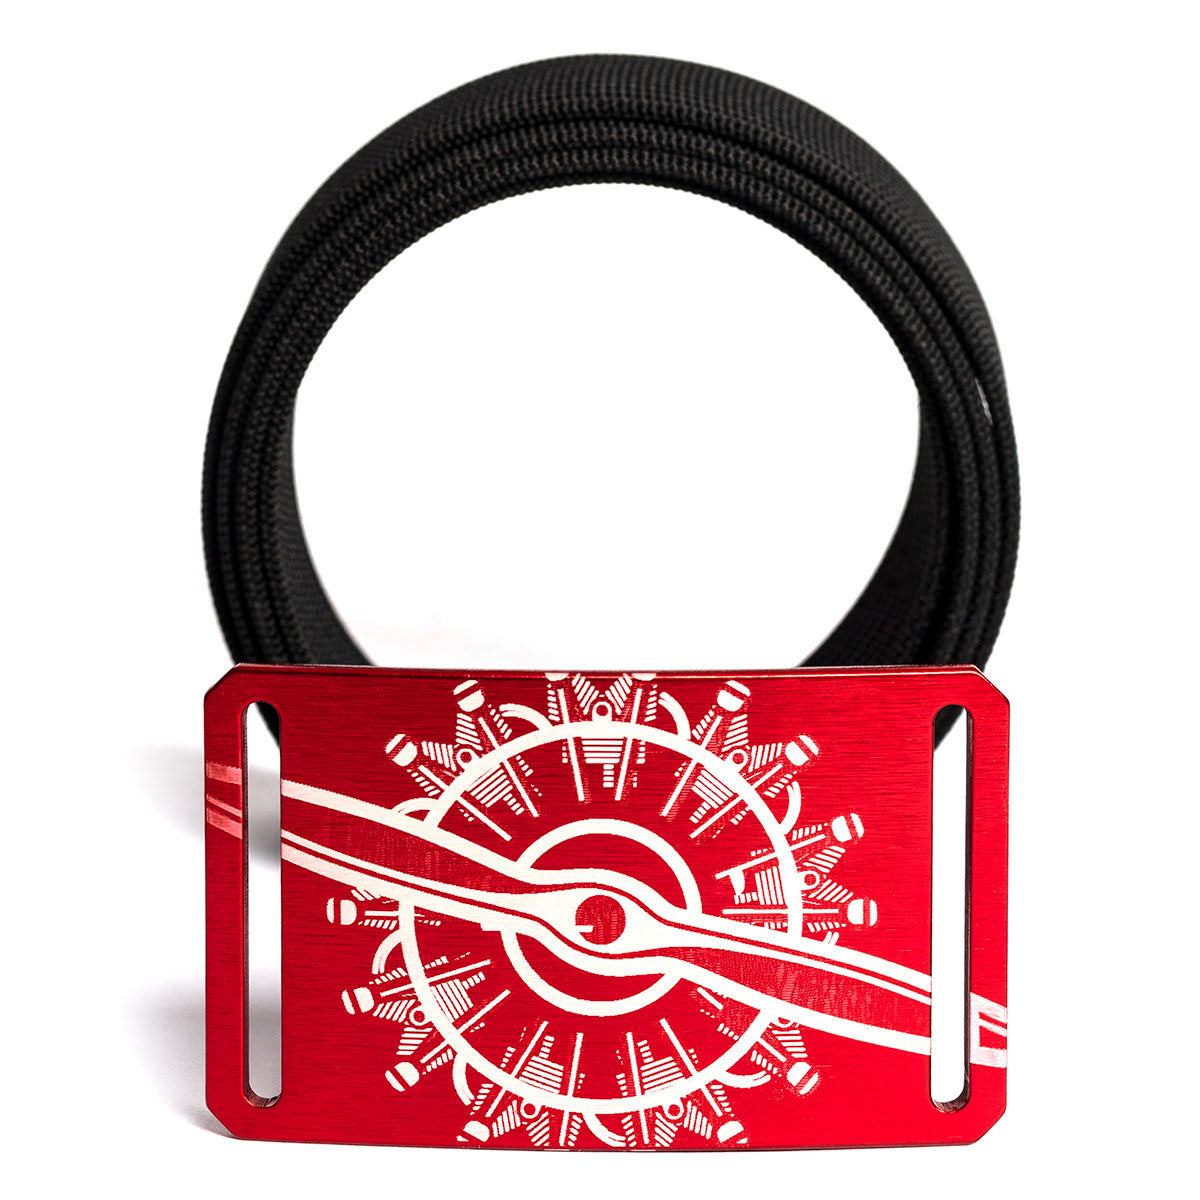 Red Oxx Radial Belt by Grip6